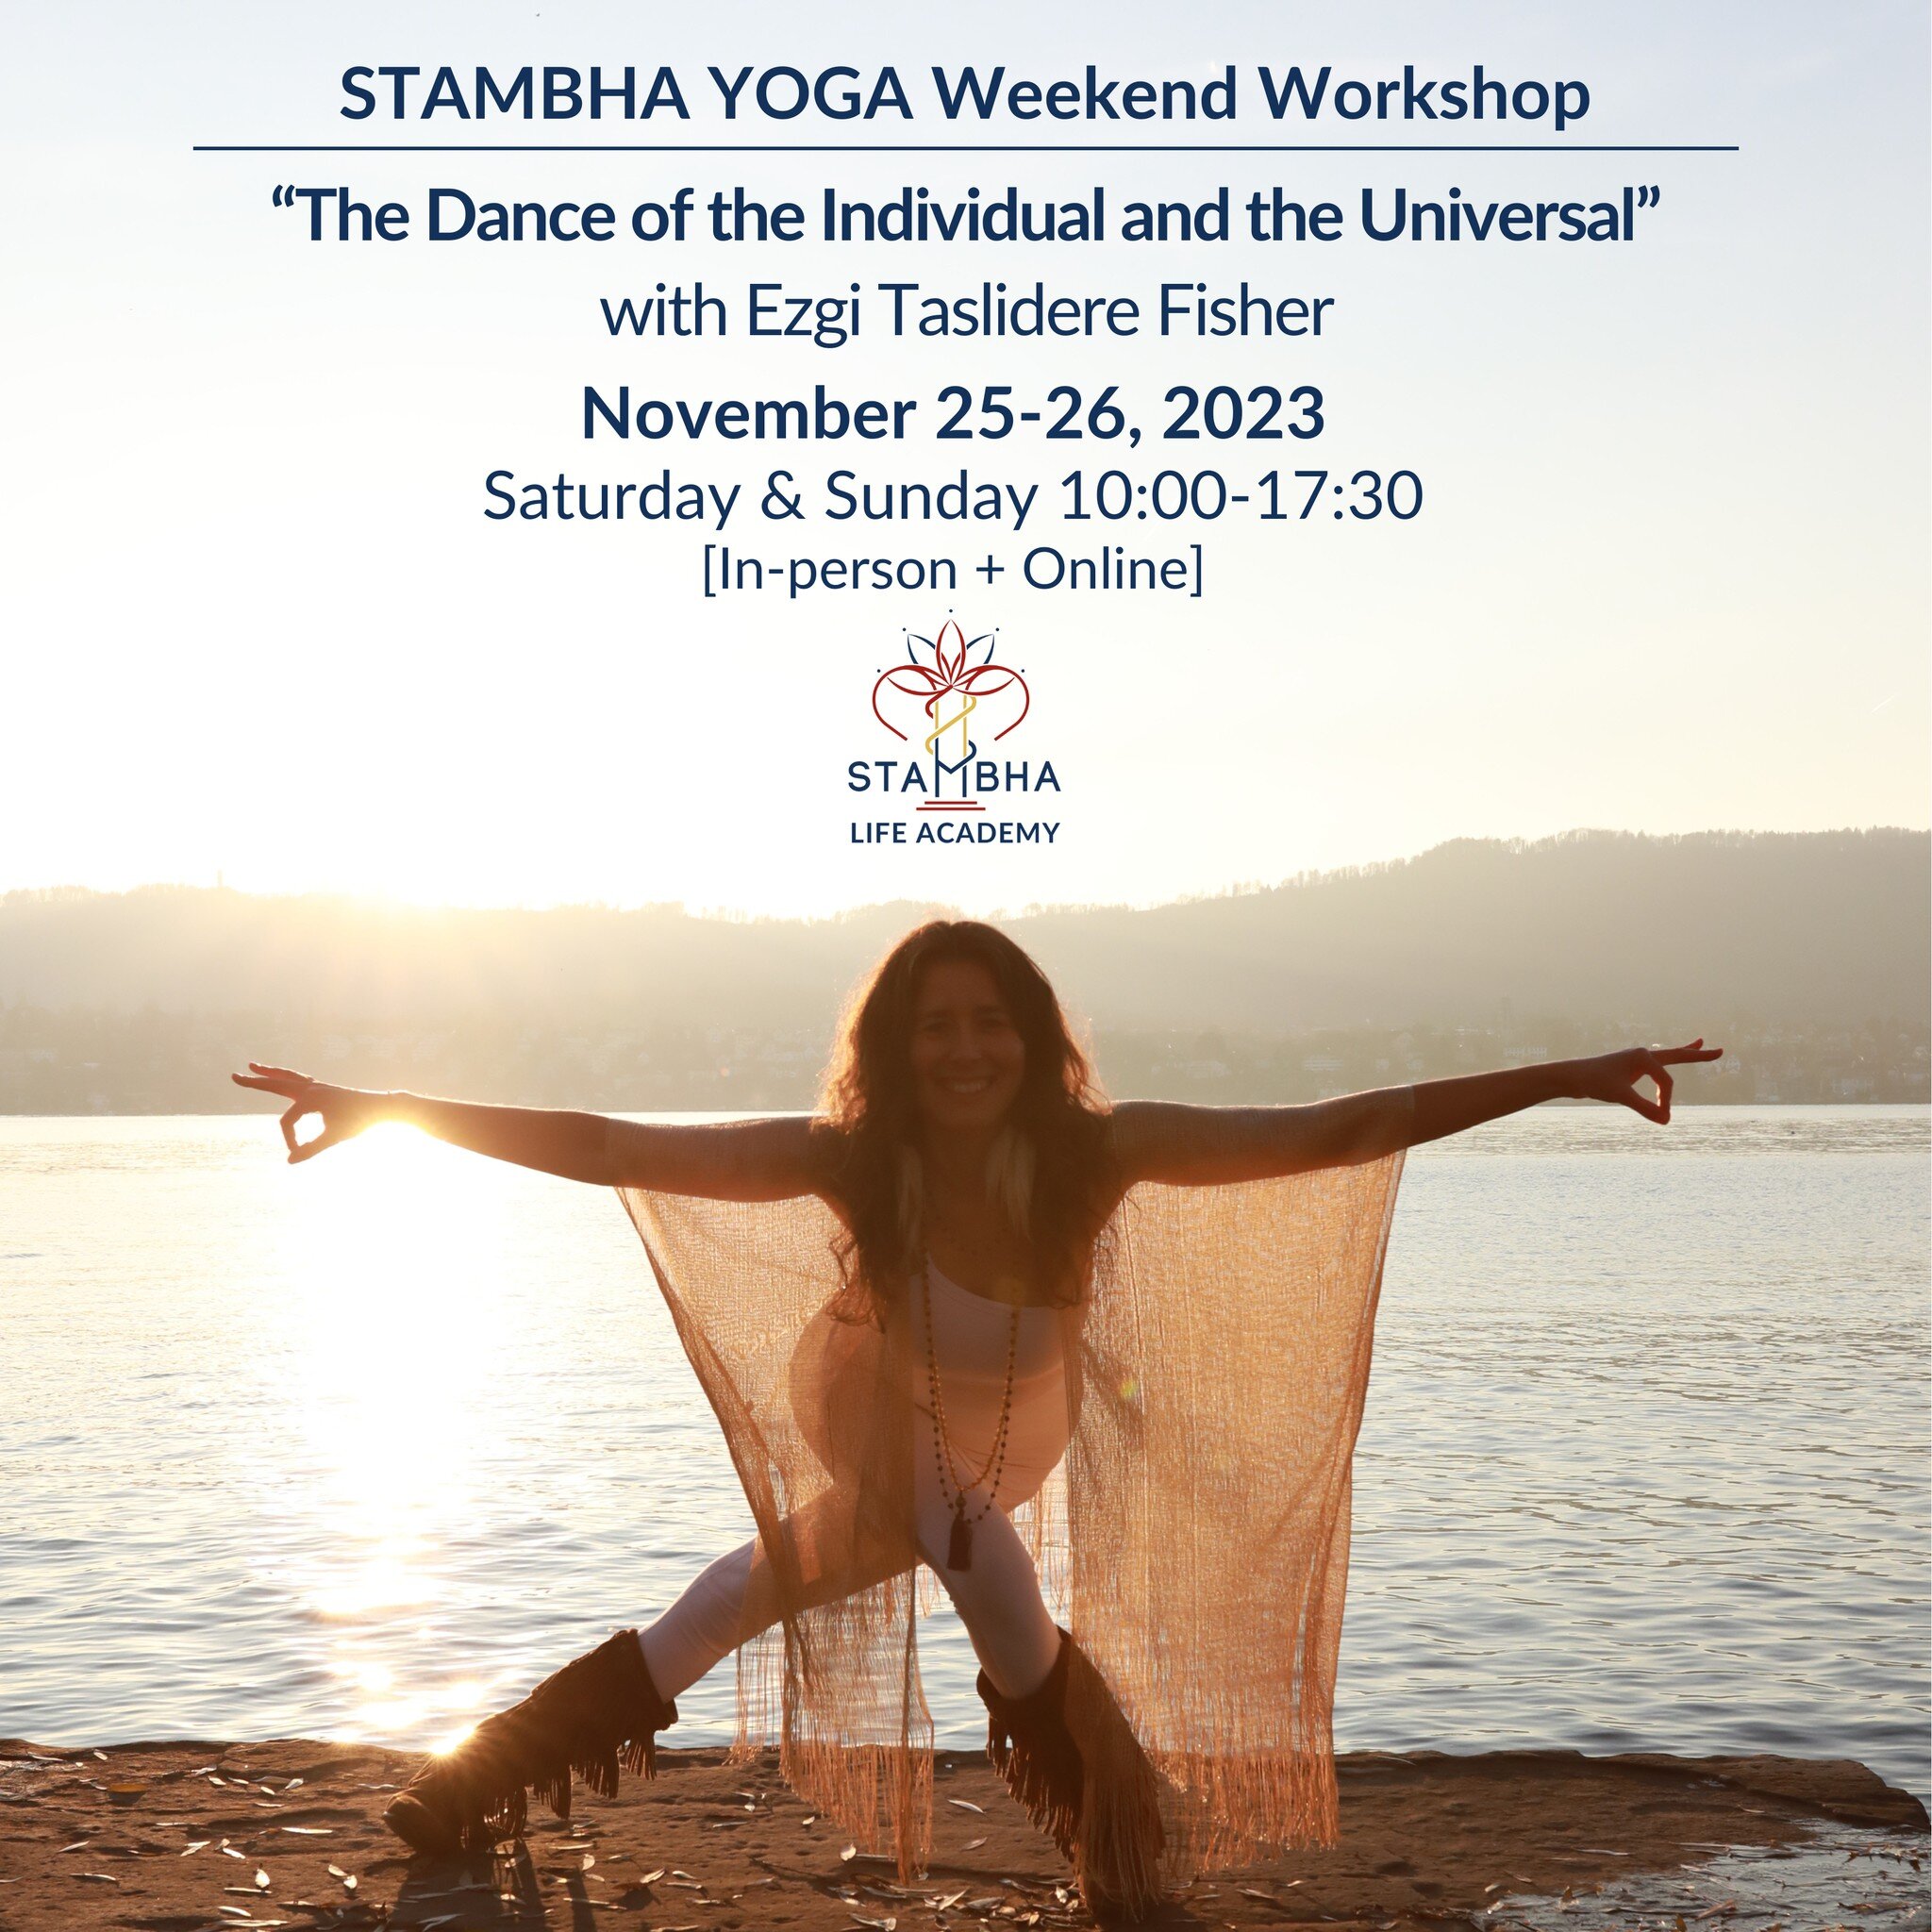 Join us for a powerful 2-day journey into the depths of yoga!
Register now! and take advantage of the Early Bird pricing until November 20th!

Payment **by 20.11.2023, Early Bird Special:** 
CHF 333.- (Switzerland) / EUR 233 (EU)

After 20.11.2023, *